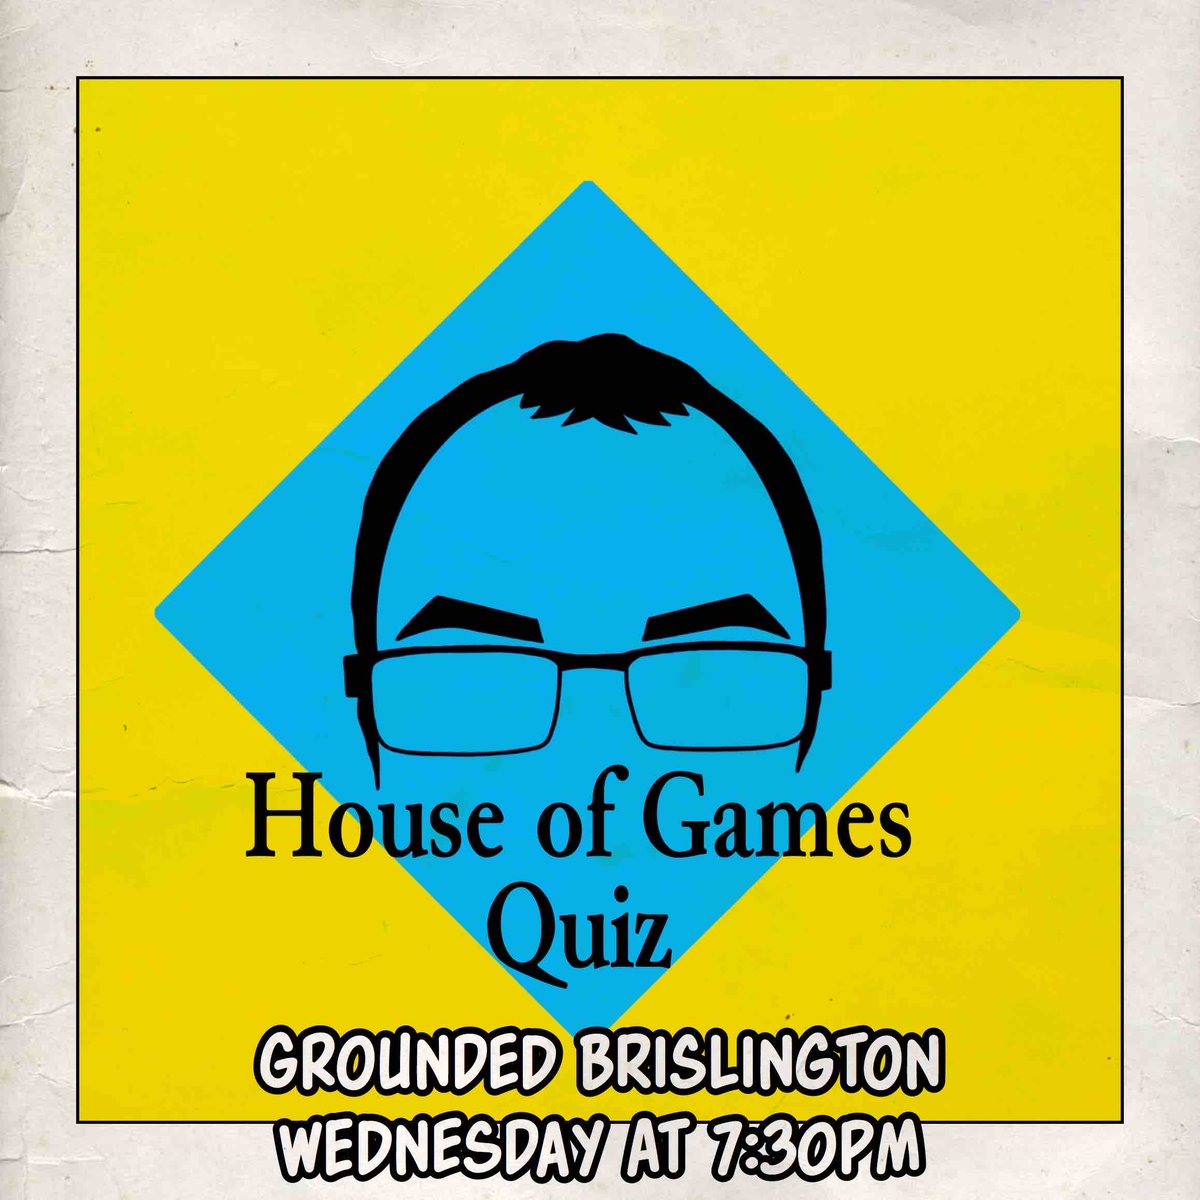 Join us on Wednesday at #Grounded #Brislington in #BS3, #Bristol for our next #QuizNight! 7:30pm start for our #HouseOfGames #GeneralKnowledge #Quiz with pizza vouchers and free entry to be won